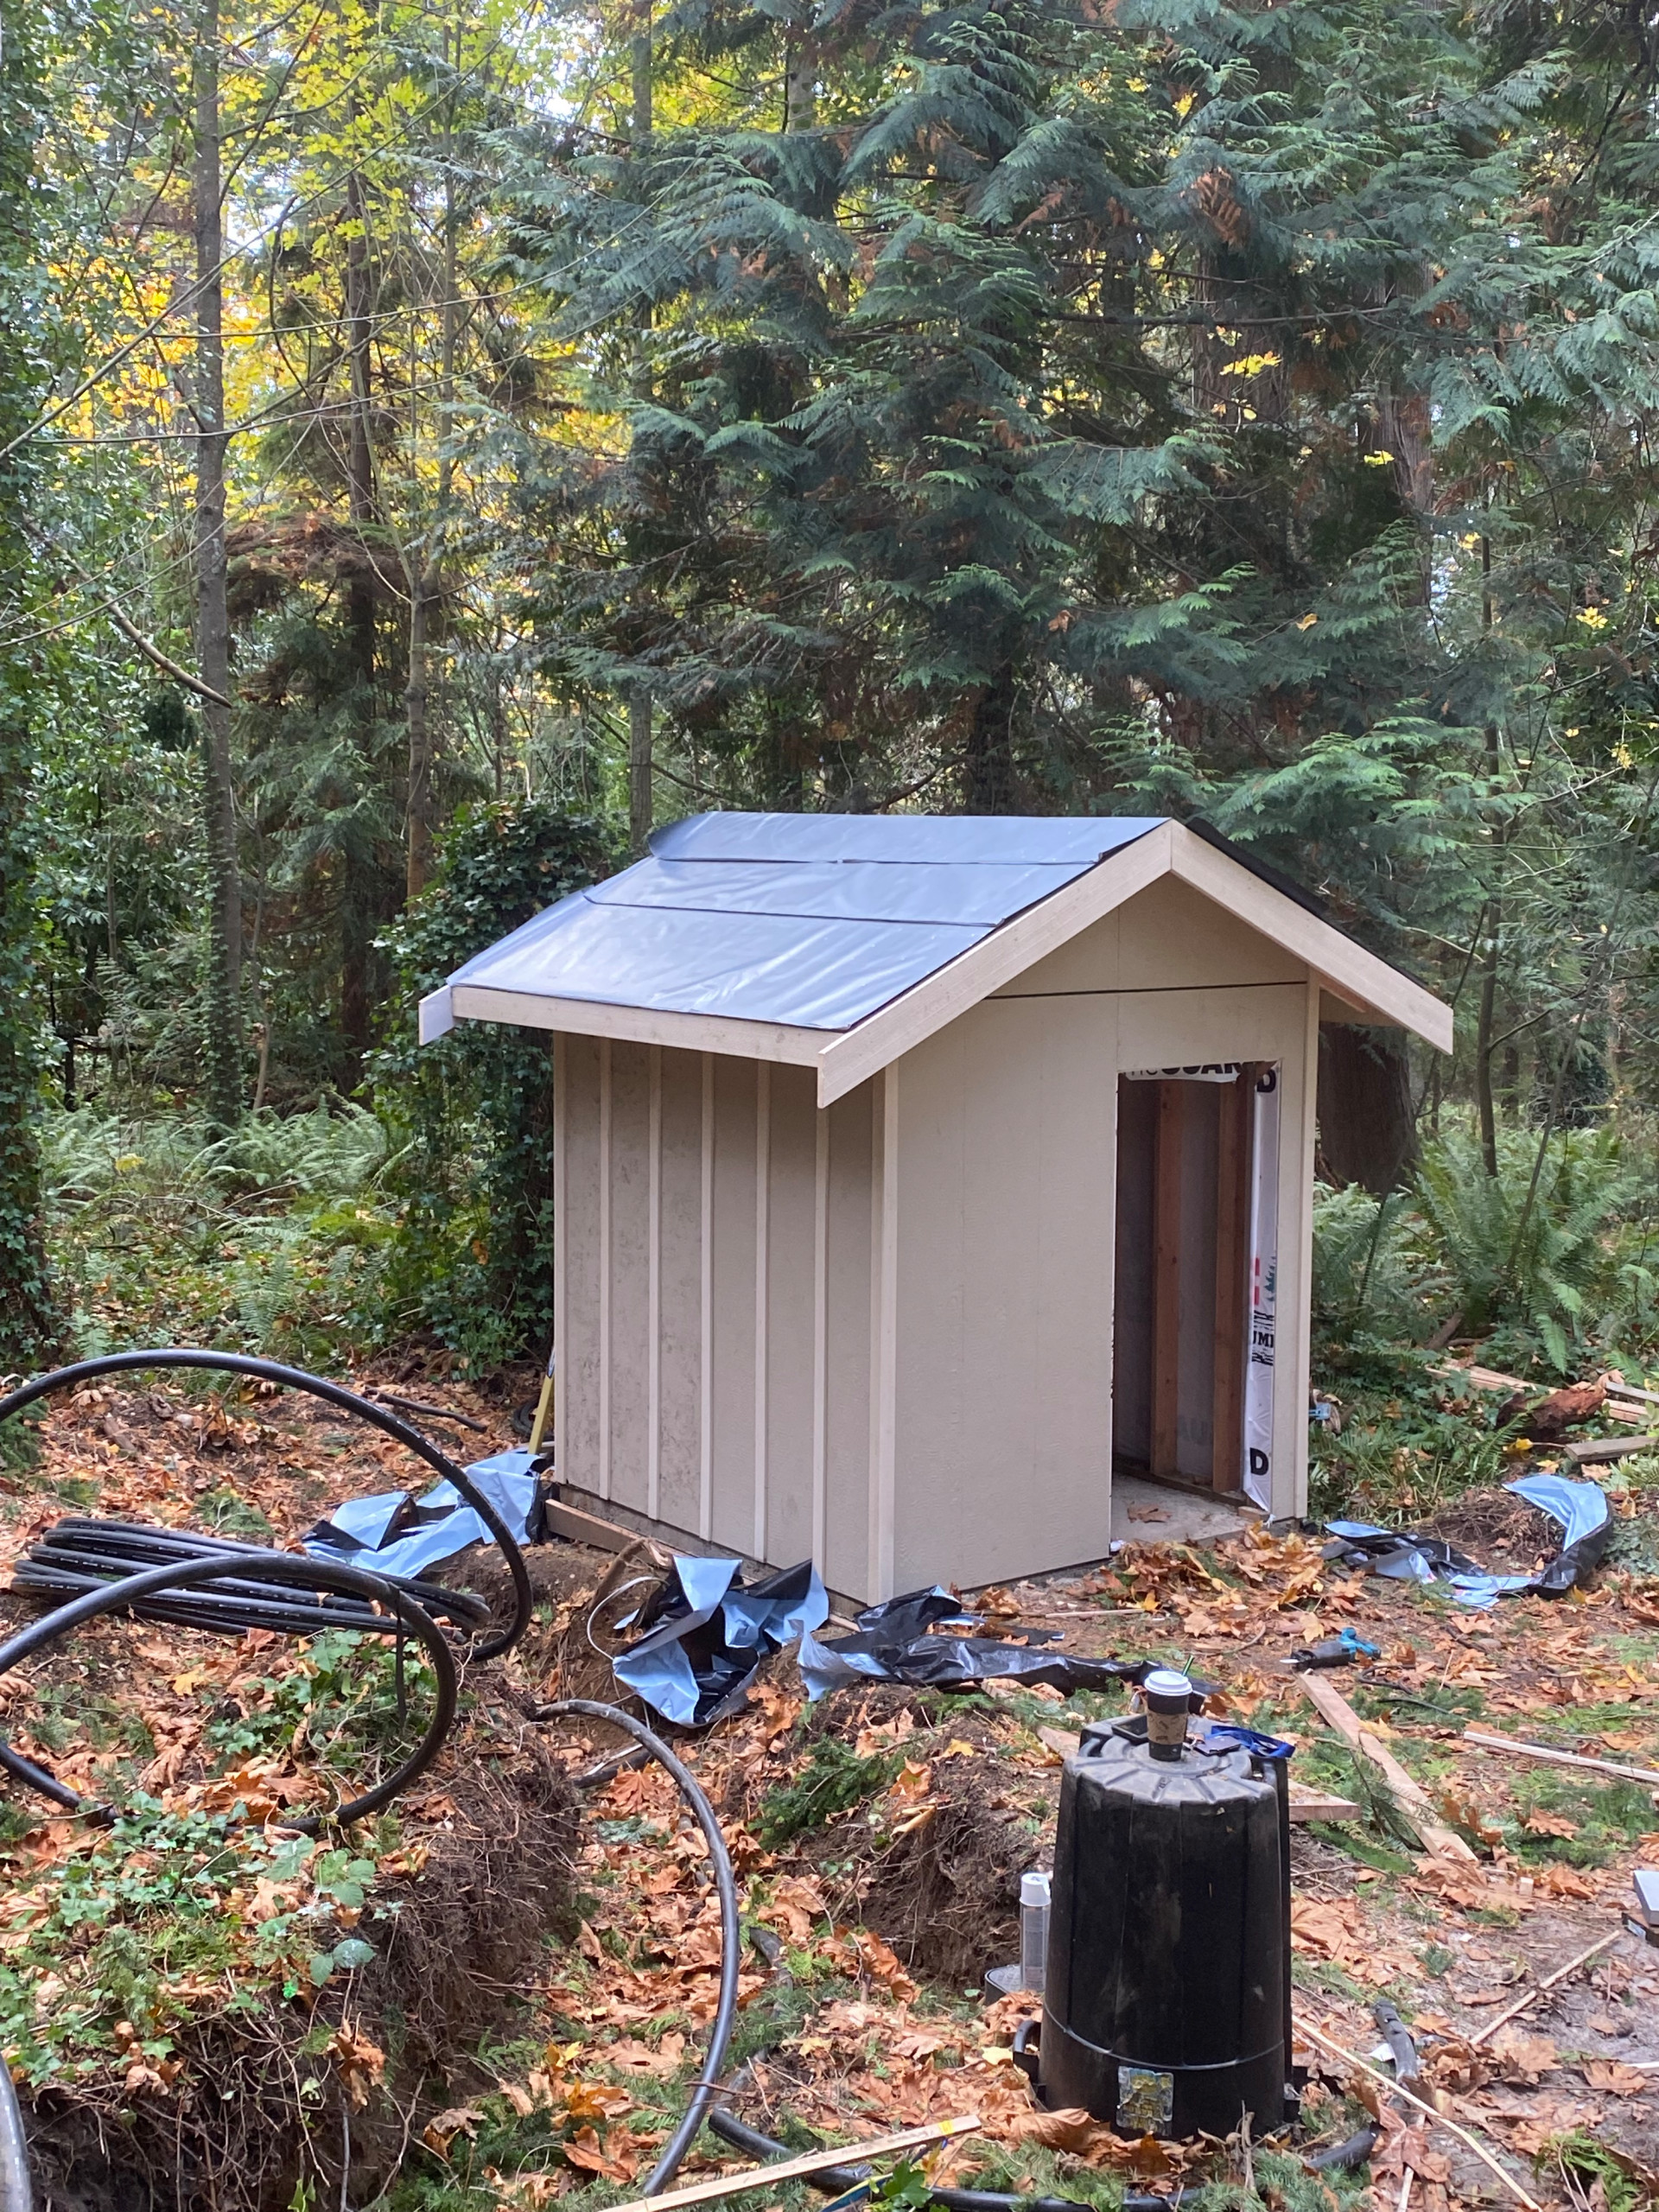 Camano Pumhouse In The Woods